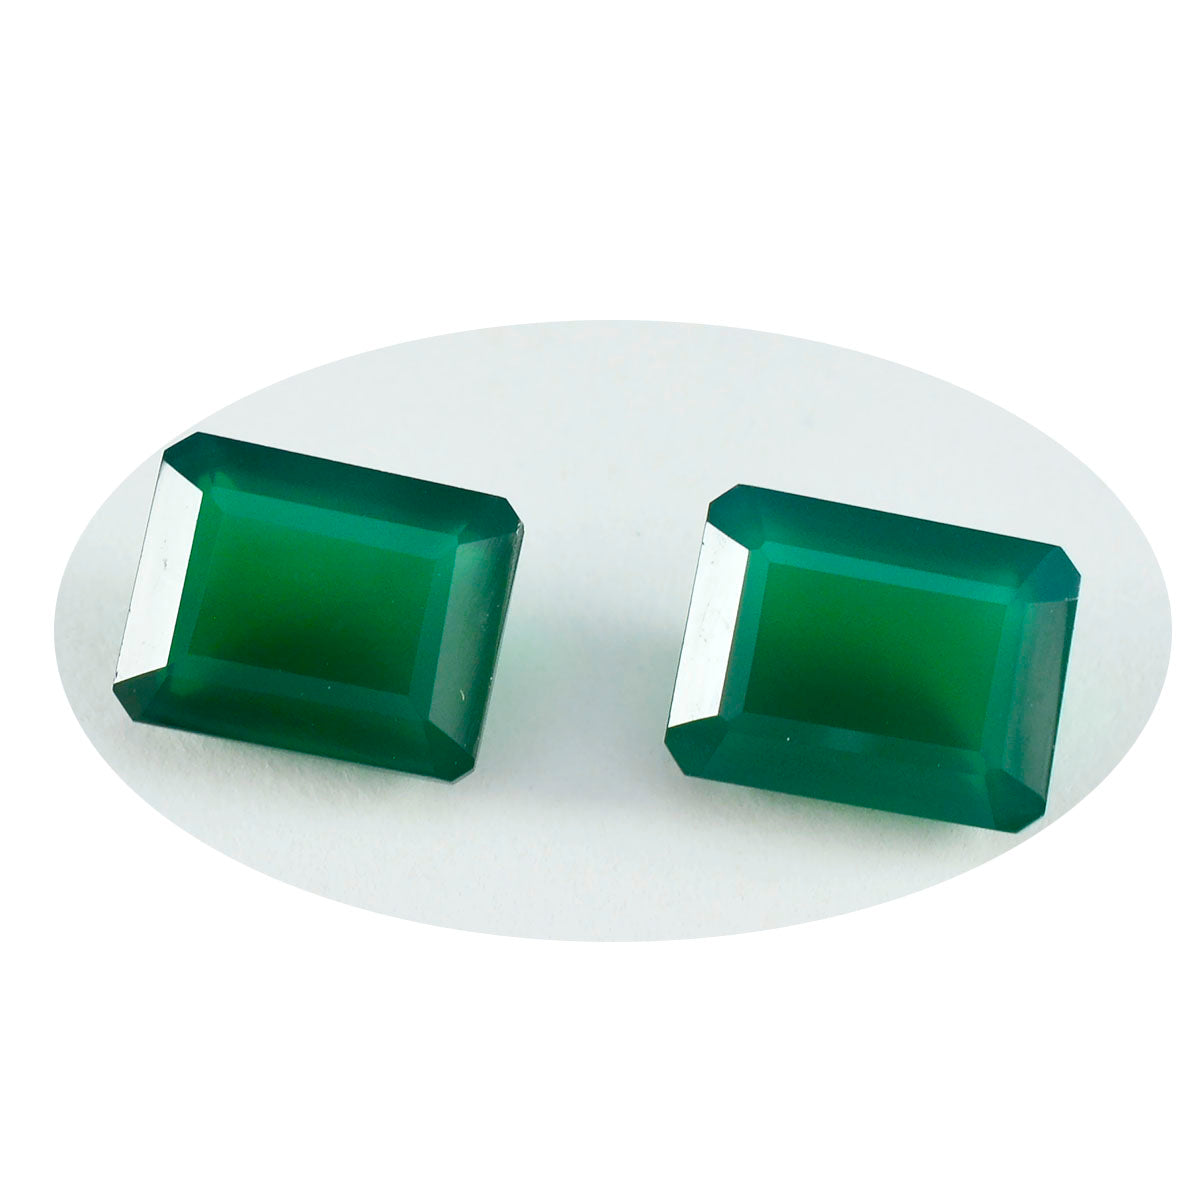 Riyogems 1PC Real Green Onyx Faceted 7X9 mm Octagon Shape AAA Quality Gem